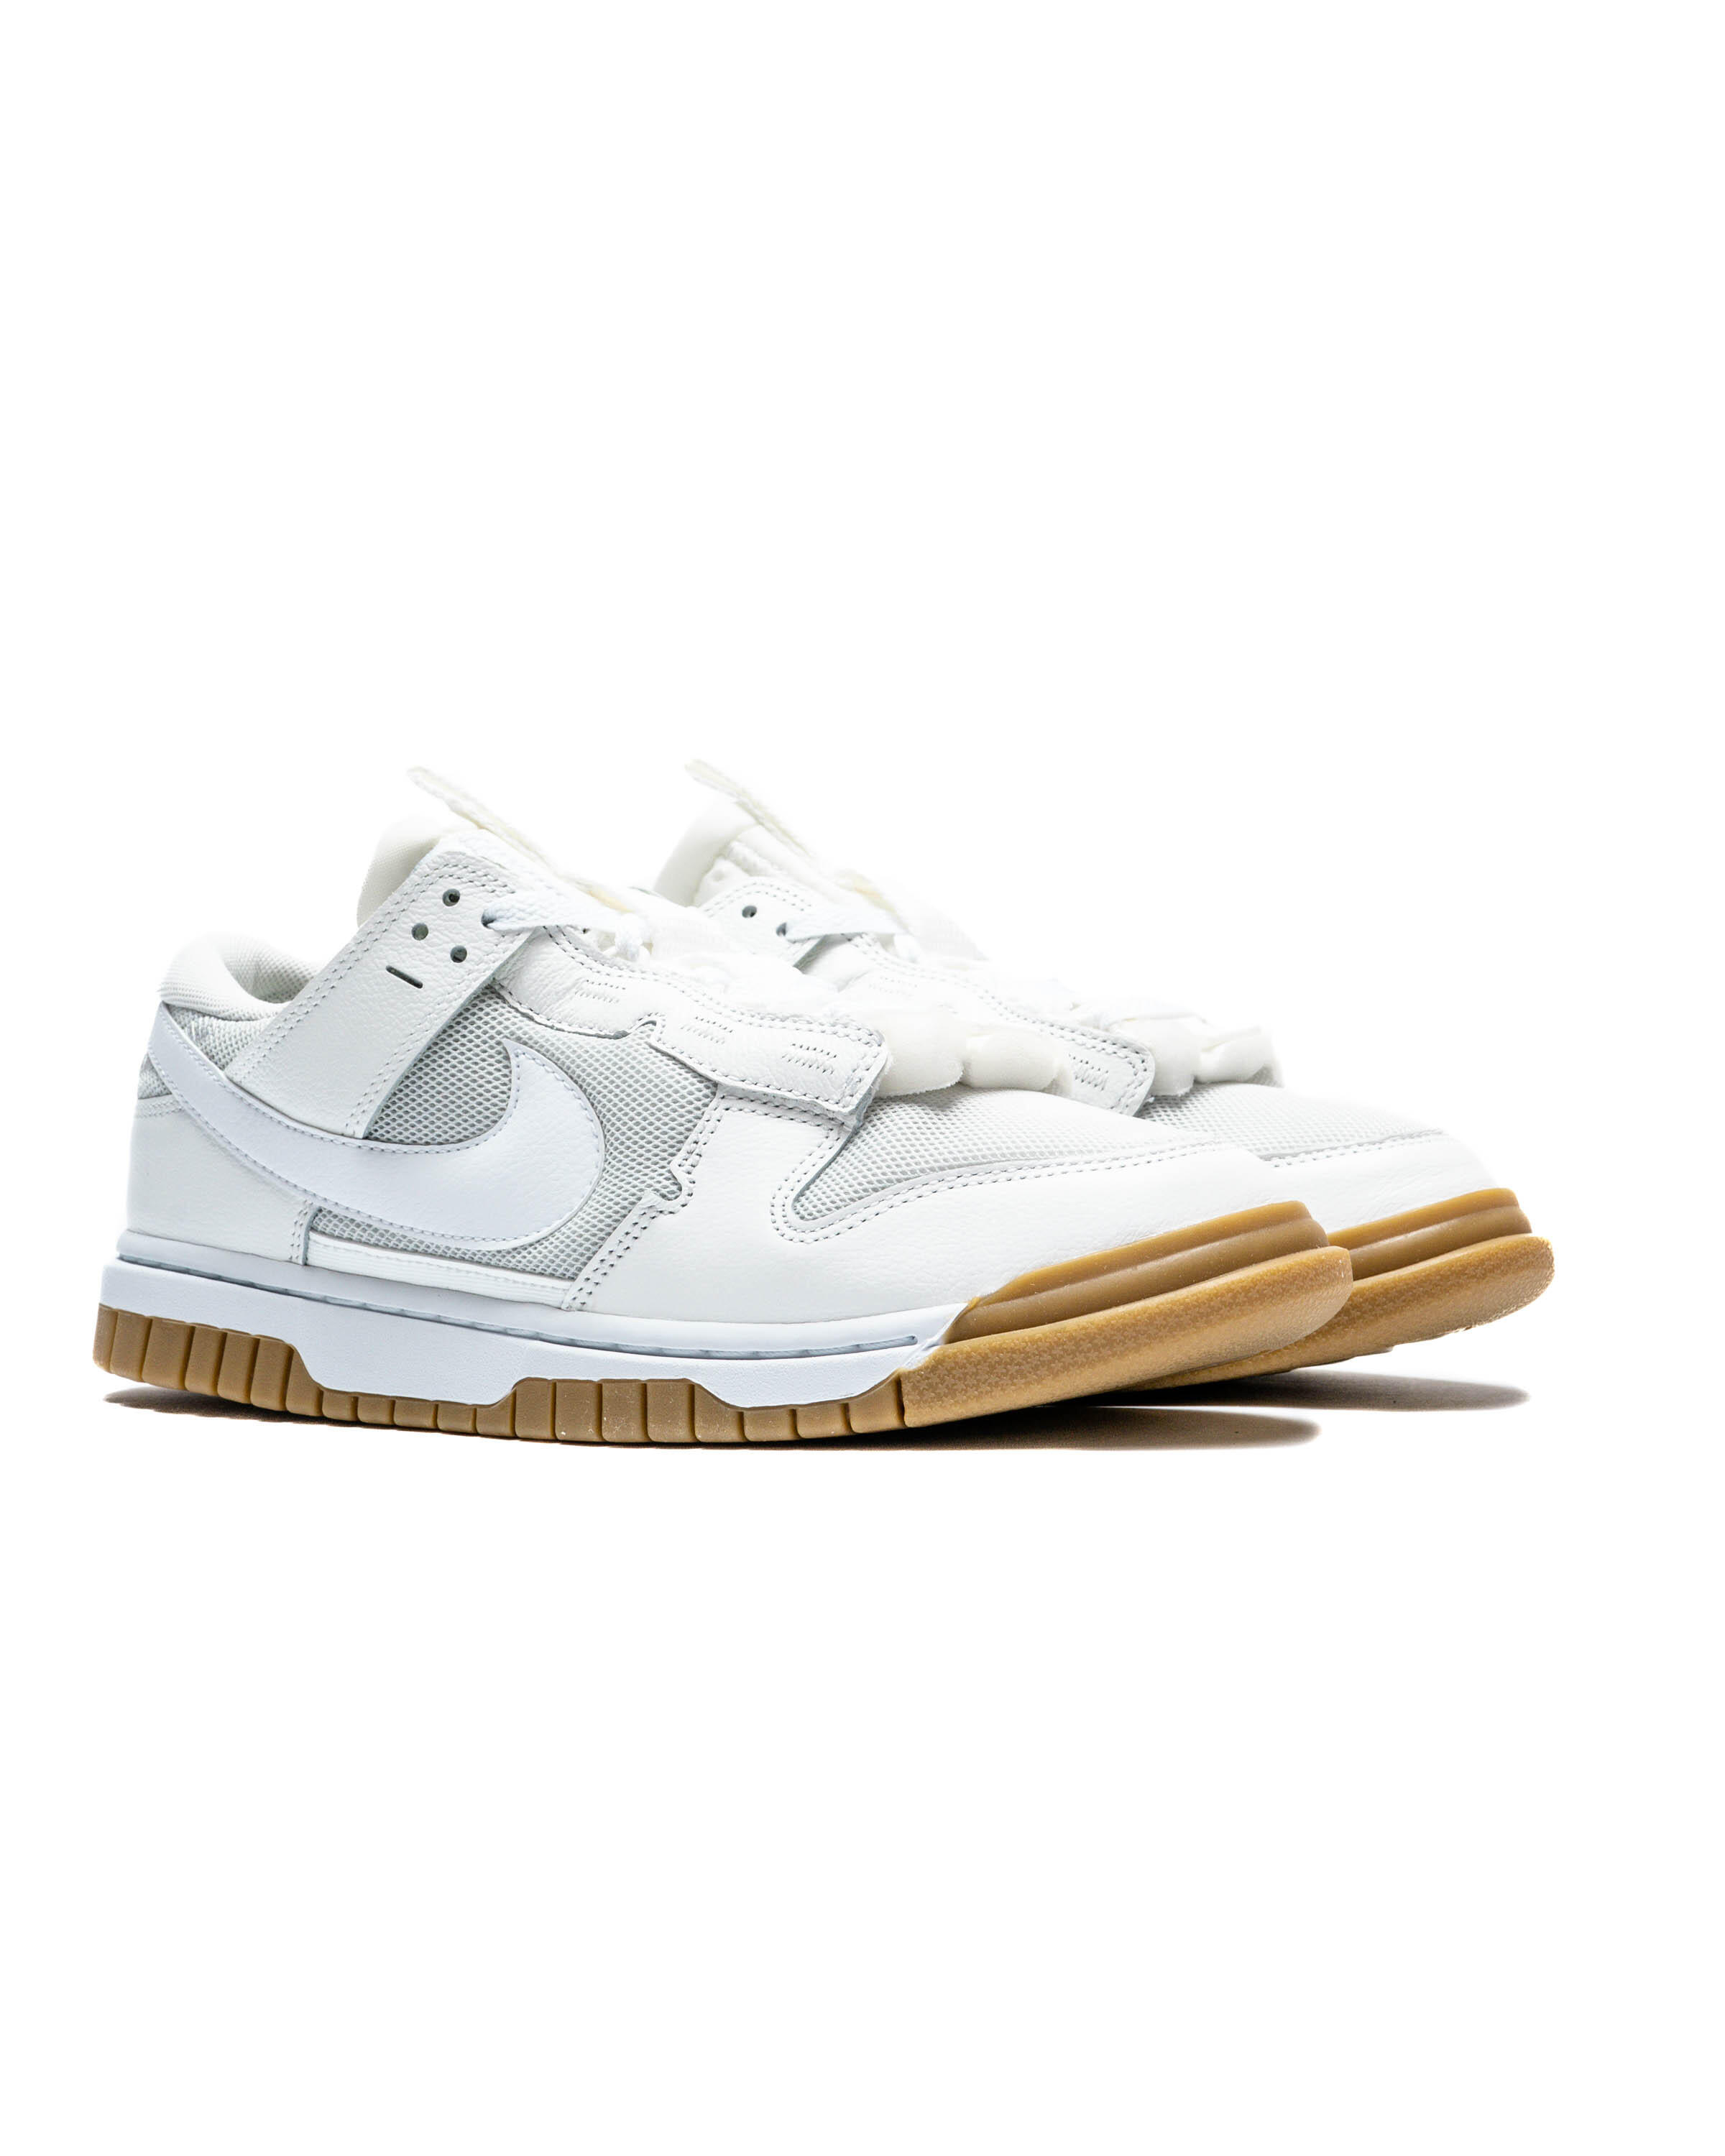 Nike Dunk Low Remastered 'White Gum'